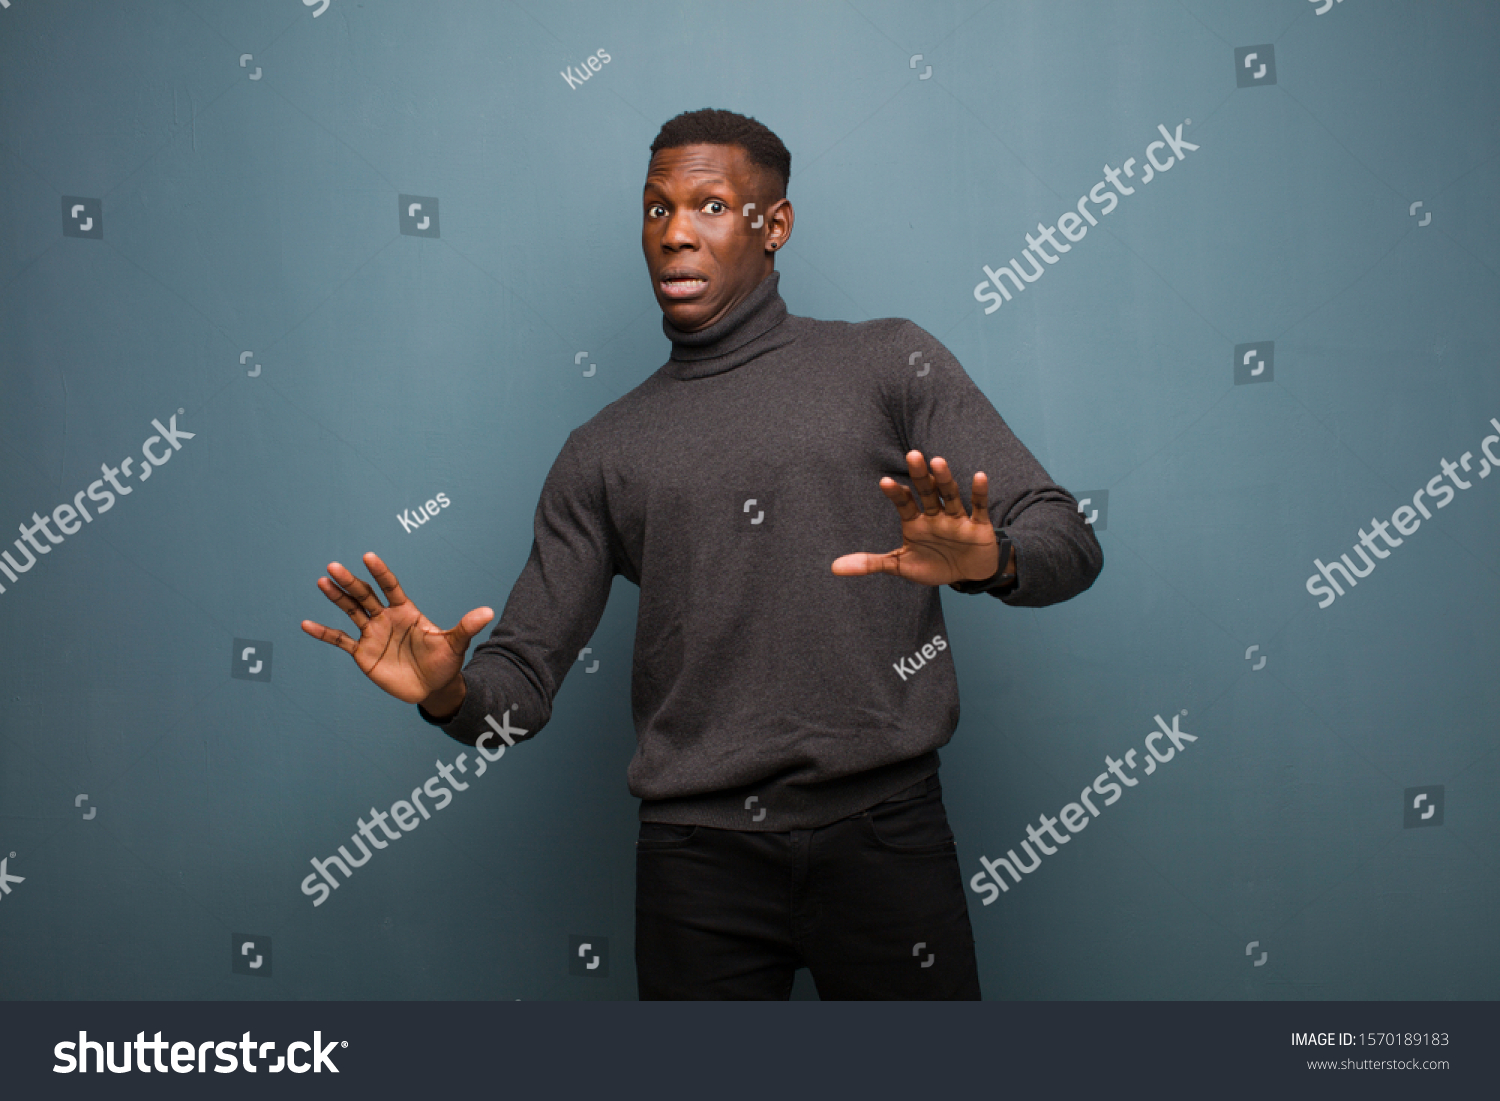 young african american black man feeling stupefied and scared, fearing something frightening, with hands open up front saying stay away against grunge wall #1570189183